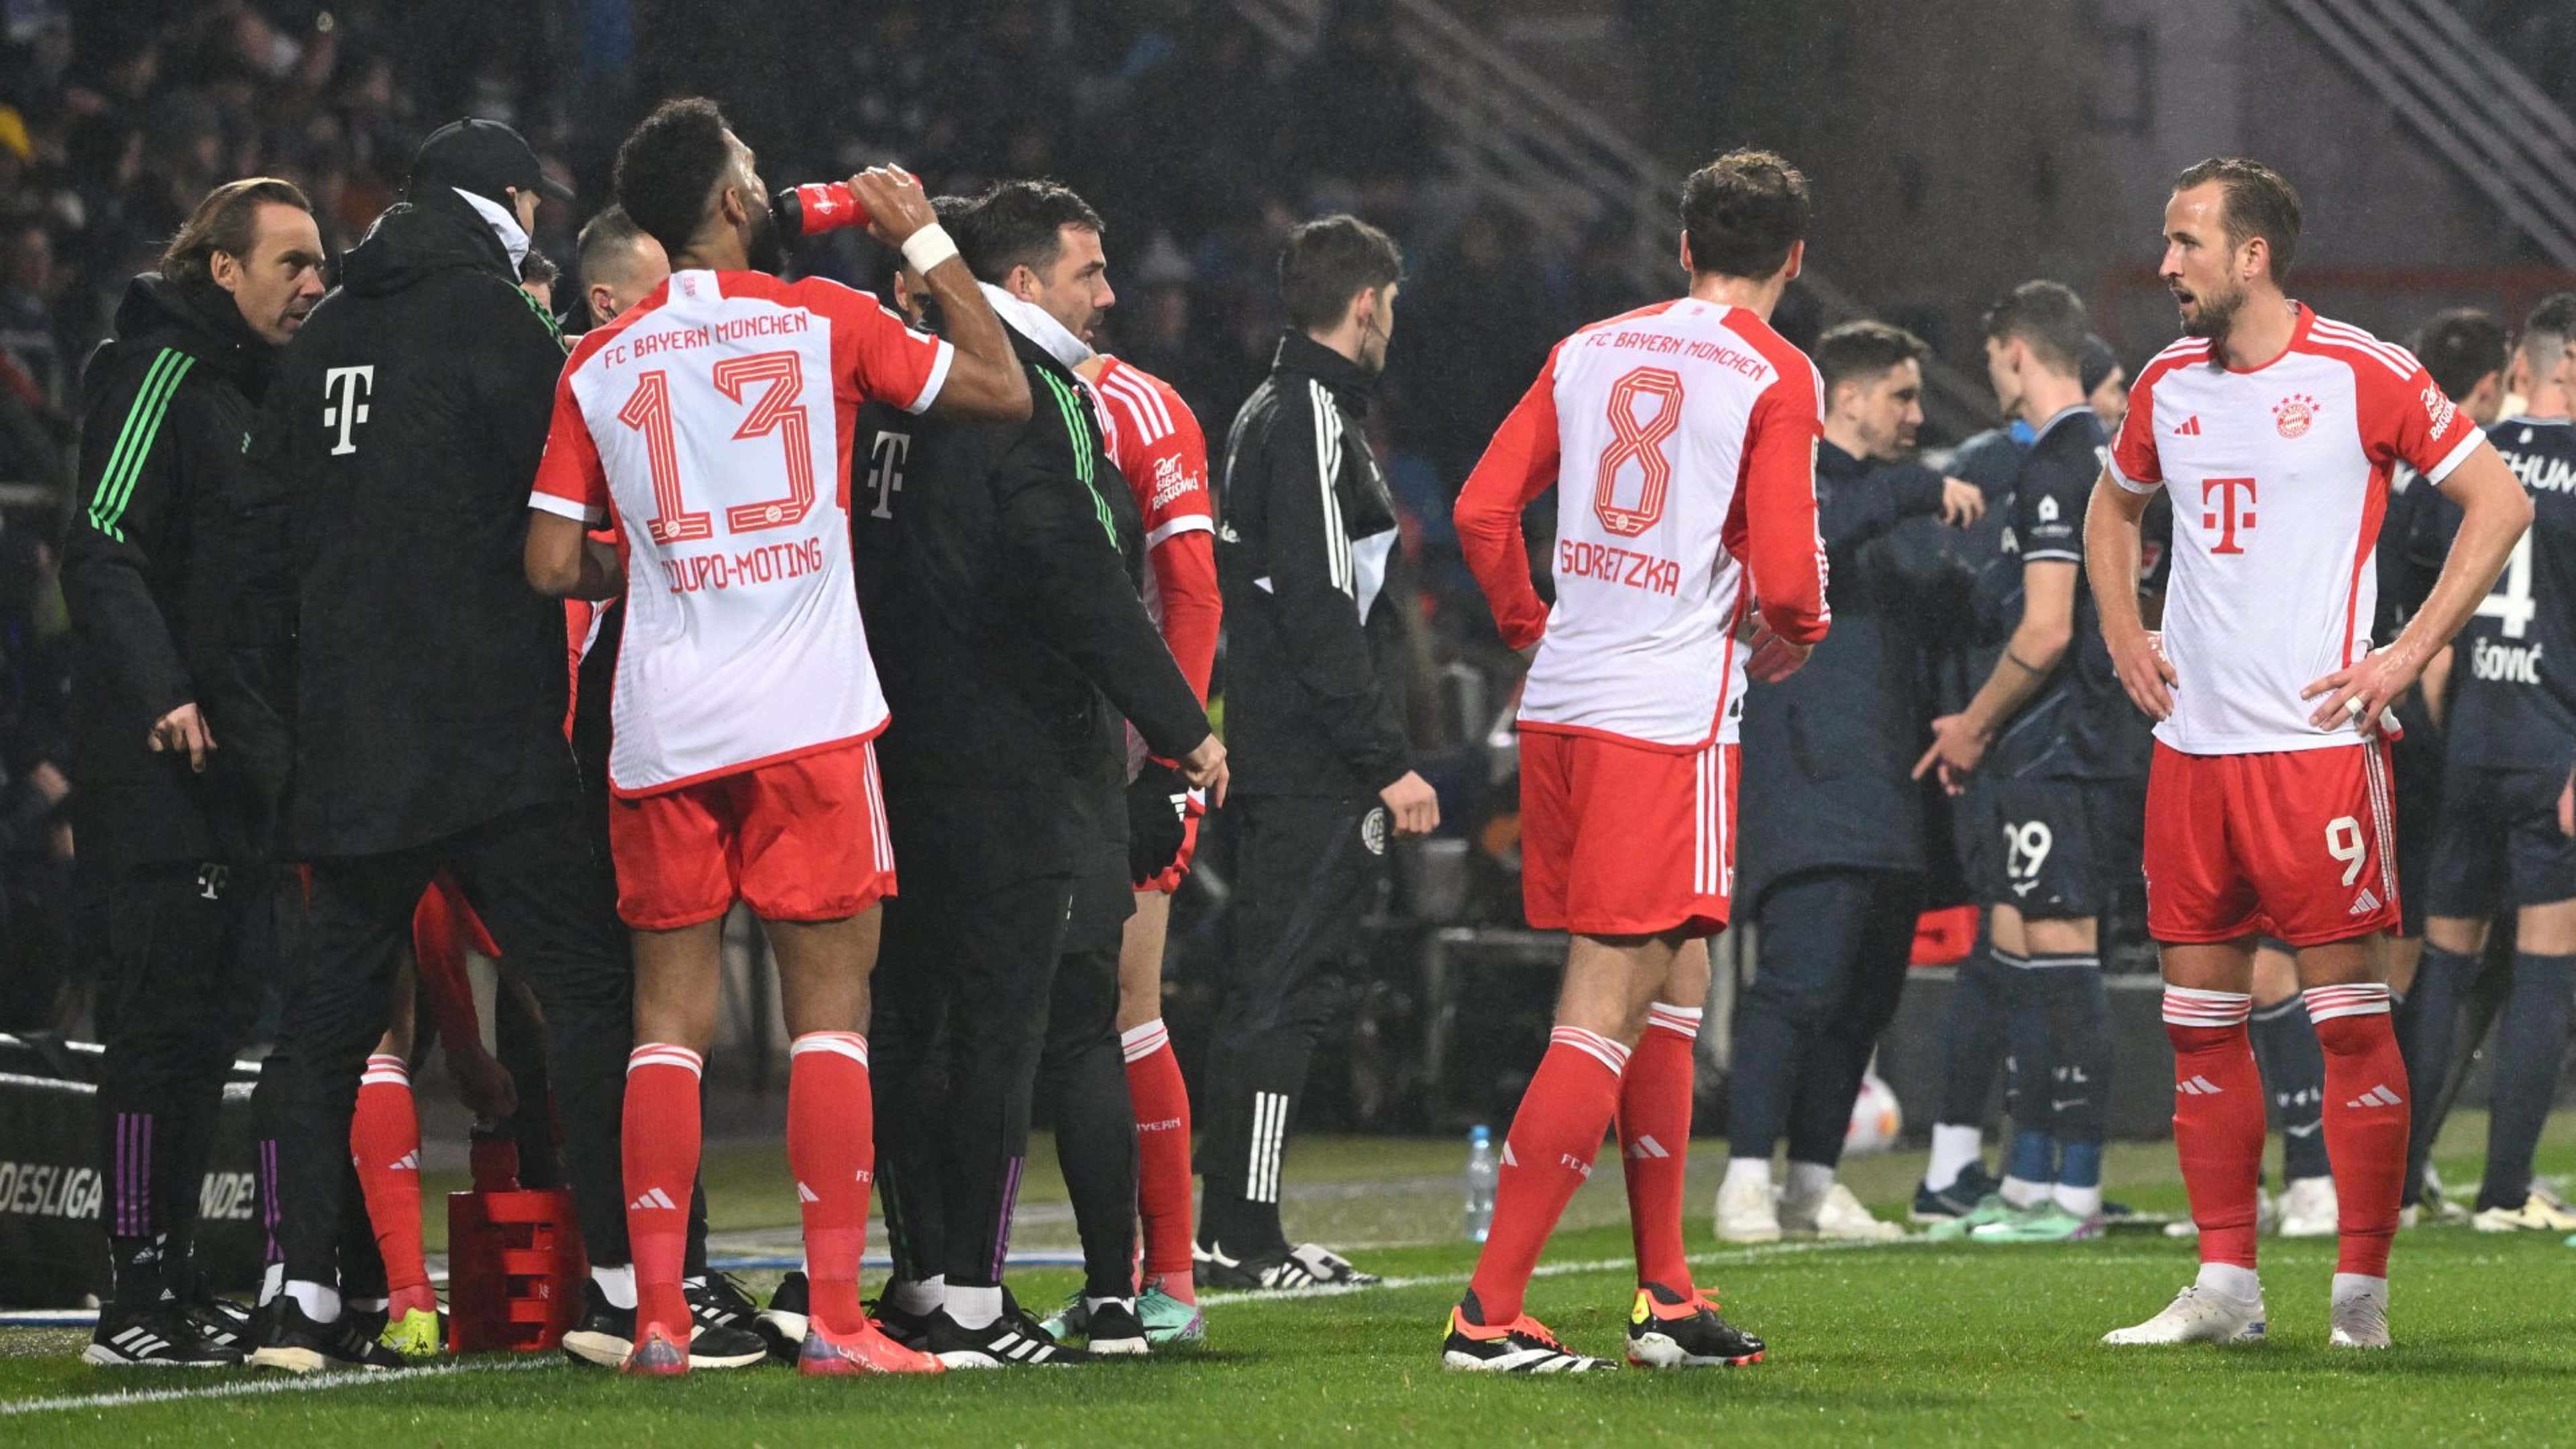 Chaos in the Bundesliga! Bochum vs Bayern Munich stopped twice as fans stage protest by launching tennis balls onto pitch - minutes after Harry Kane produces one of the worst misses of